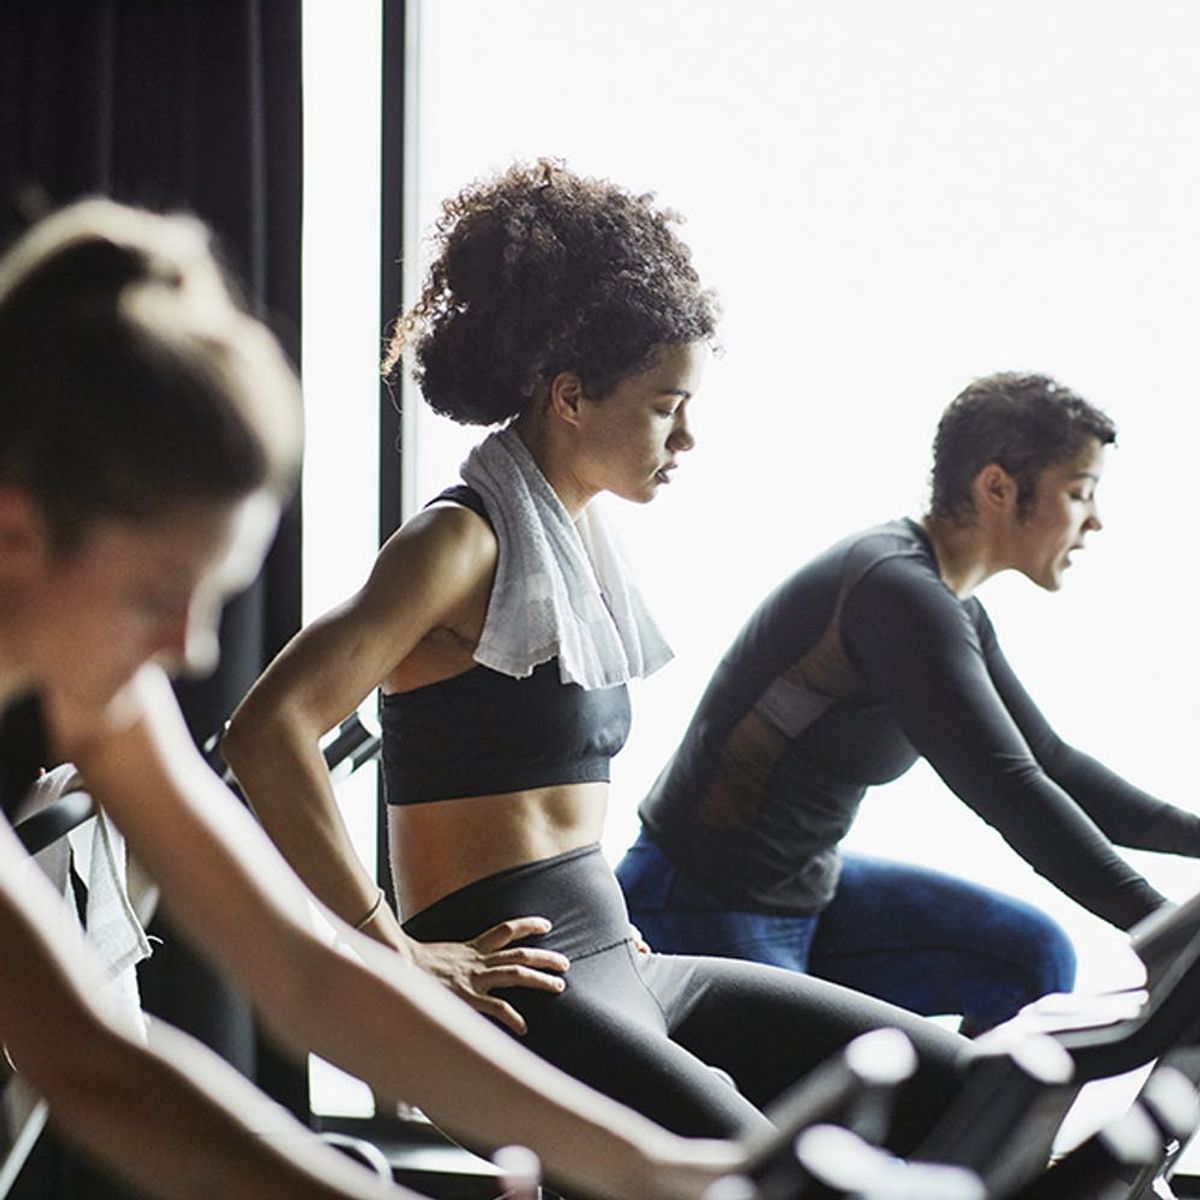 The Ultimate Workout for You, According to Your Zodiac Sign